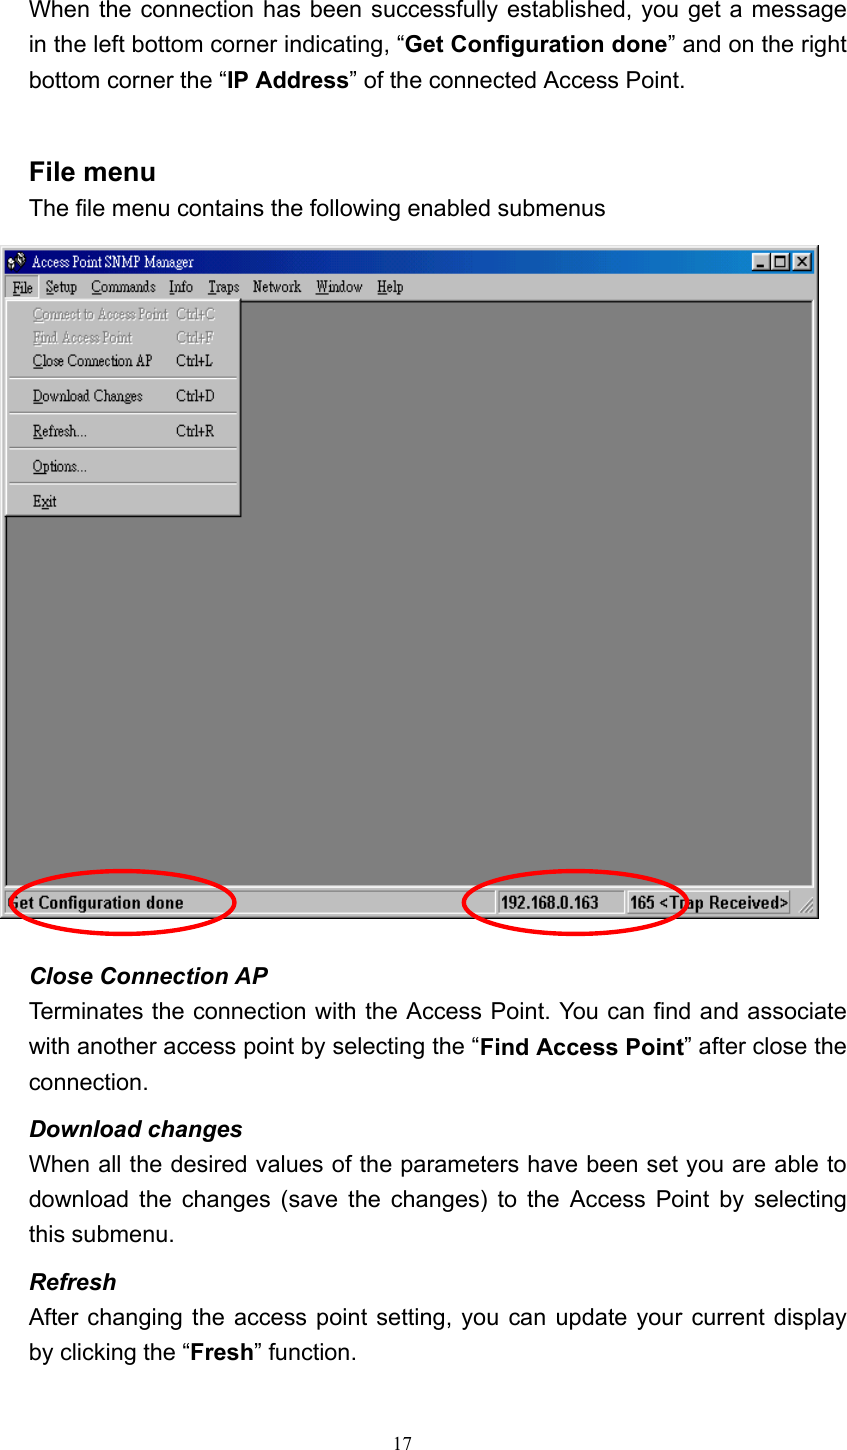   17 When the connection has been successfully established, you get a message in the left bottom corner indicating, “Get Configuration done” and on the right bottom corner the “IP Address” of the connected Access Point.  File menu The file menu contains the following enabled submenus  Close Connection AP   Terminates the connection with the Access Point. You can find and associate with another access point by selecting the “Find Access Point” after close the connection. Download changes When all the desired values of the parameters have been set you are able to download the changes (save the changes) to the Access Point by selecting this submenu. Refresh After changing the access point setting, you can update your current display by clicking the “Fresh” function.  